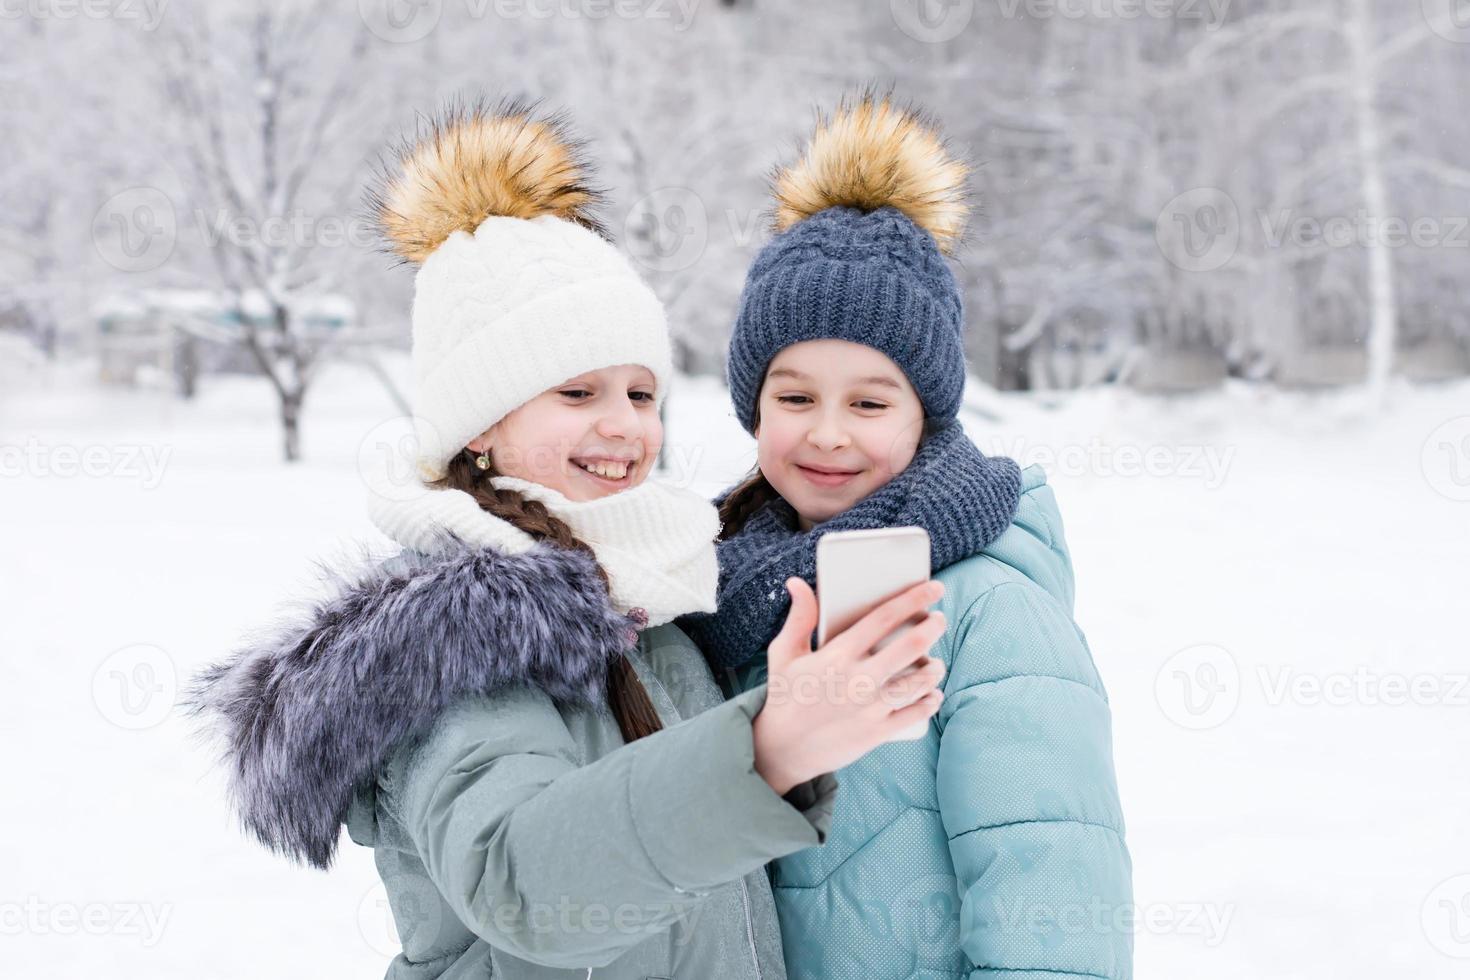 Two smiling girls in warm clothes make a video call on a smartphone in a snowy winter park. Lifestyle use of technology photo